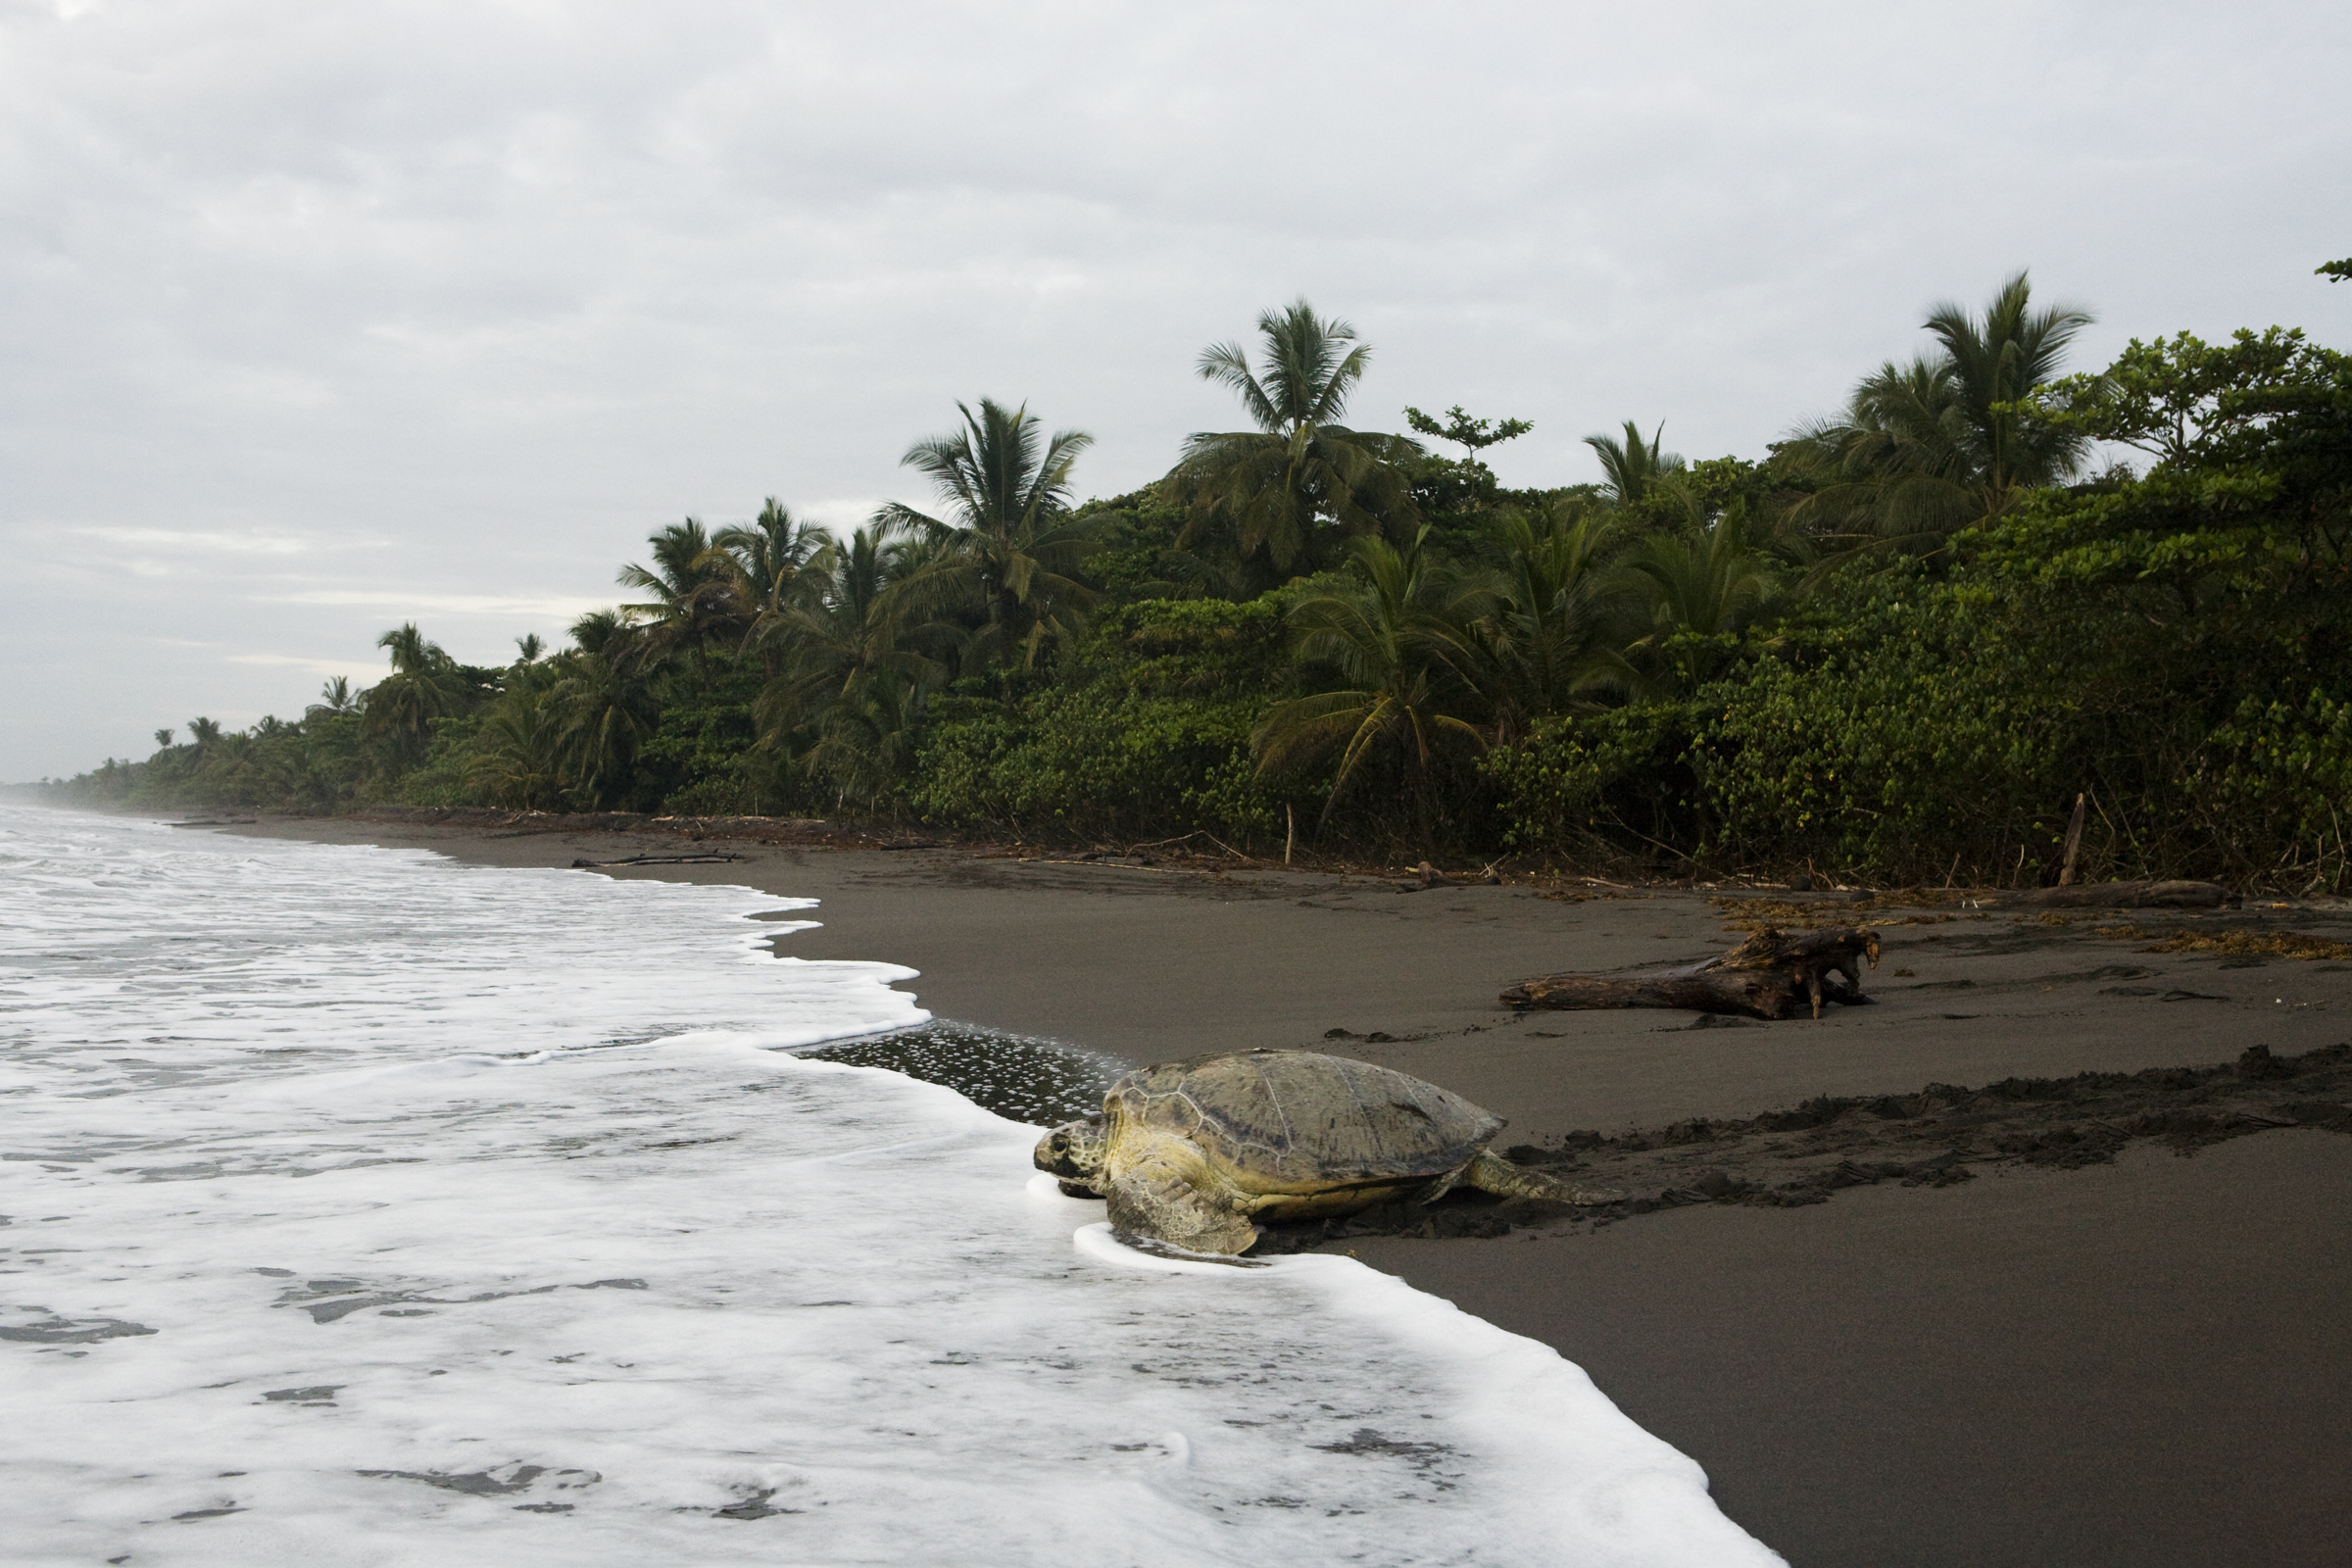 Green Sea Turtle (Chelonia mydas) female returning to sea after laying eggs, Tortuguero National Park, Costa Rica